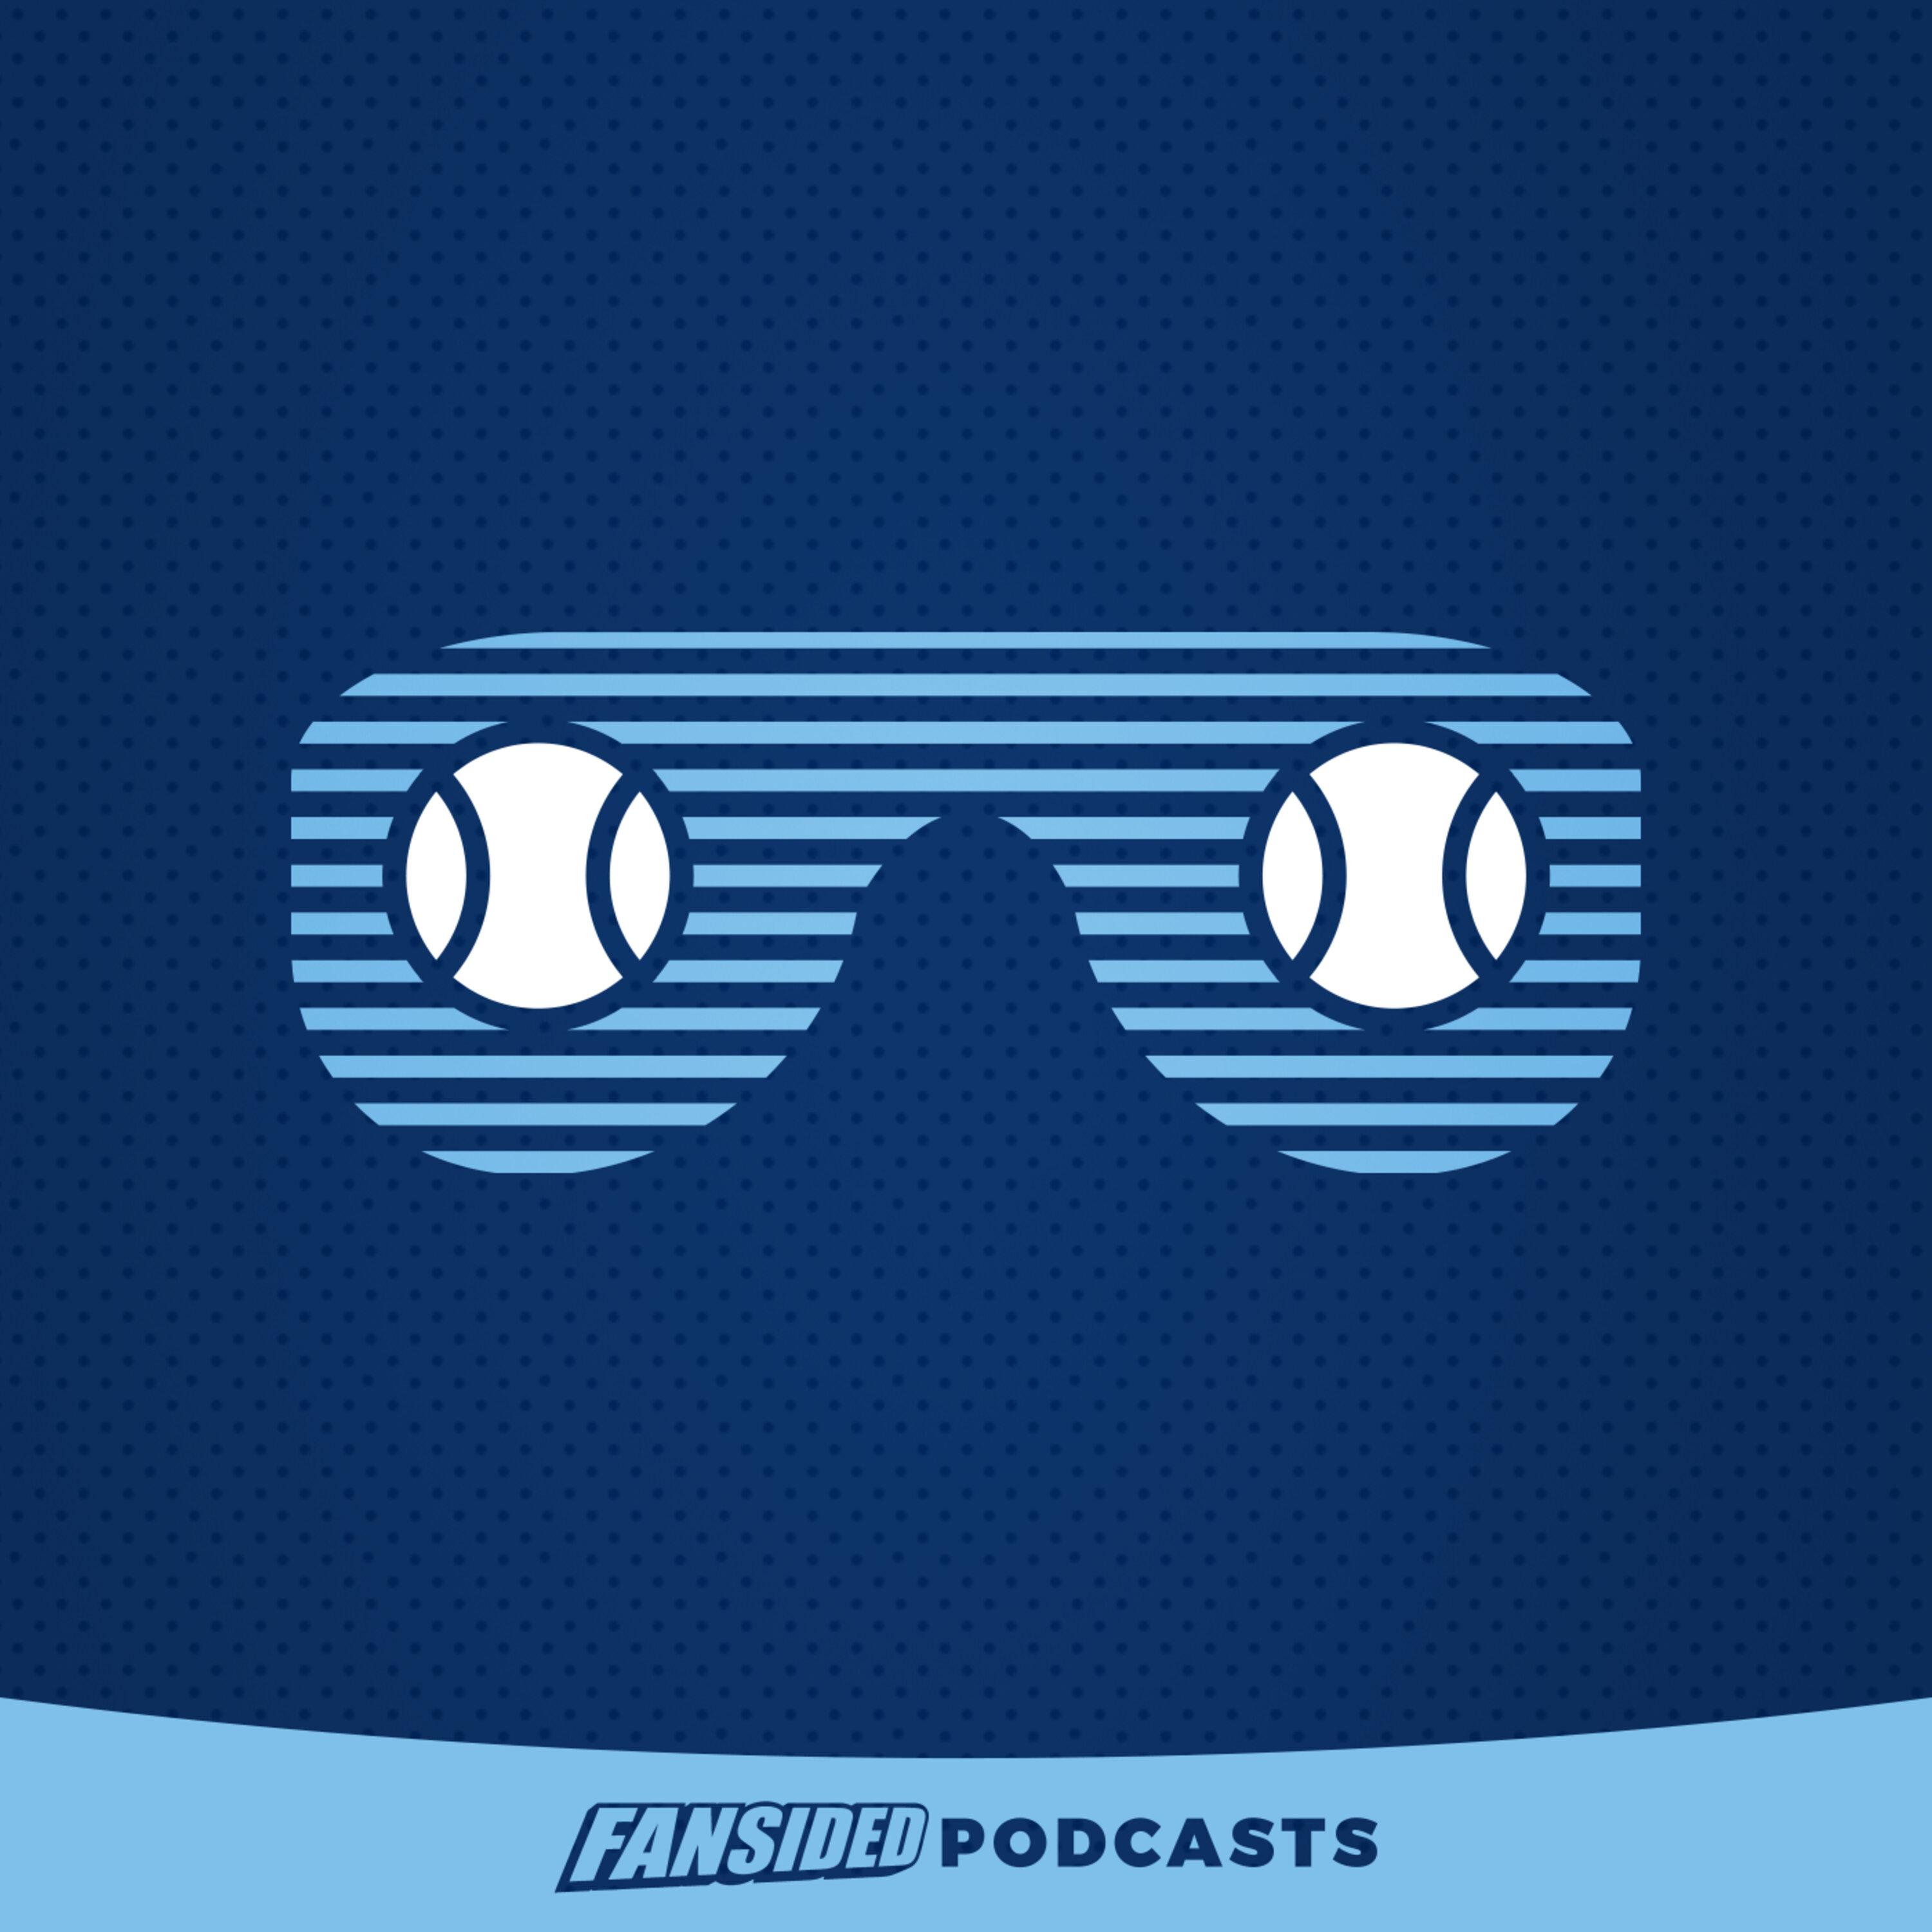 Rays Colored Glasses Podcast on the Tampa Bay Rays